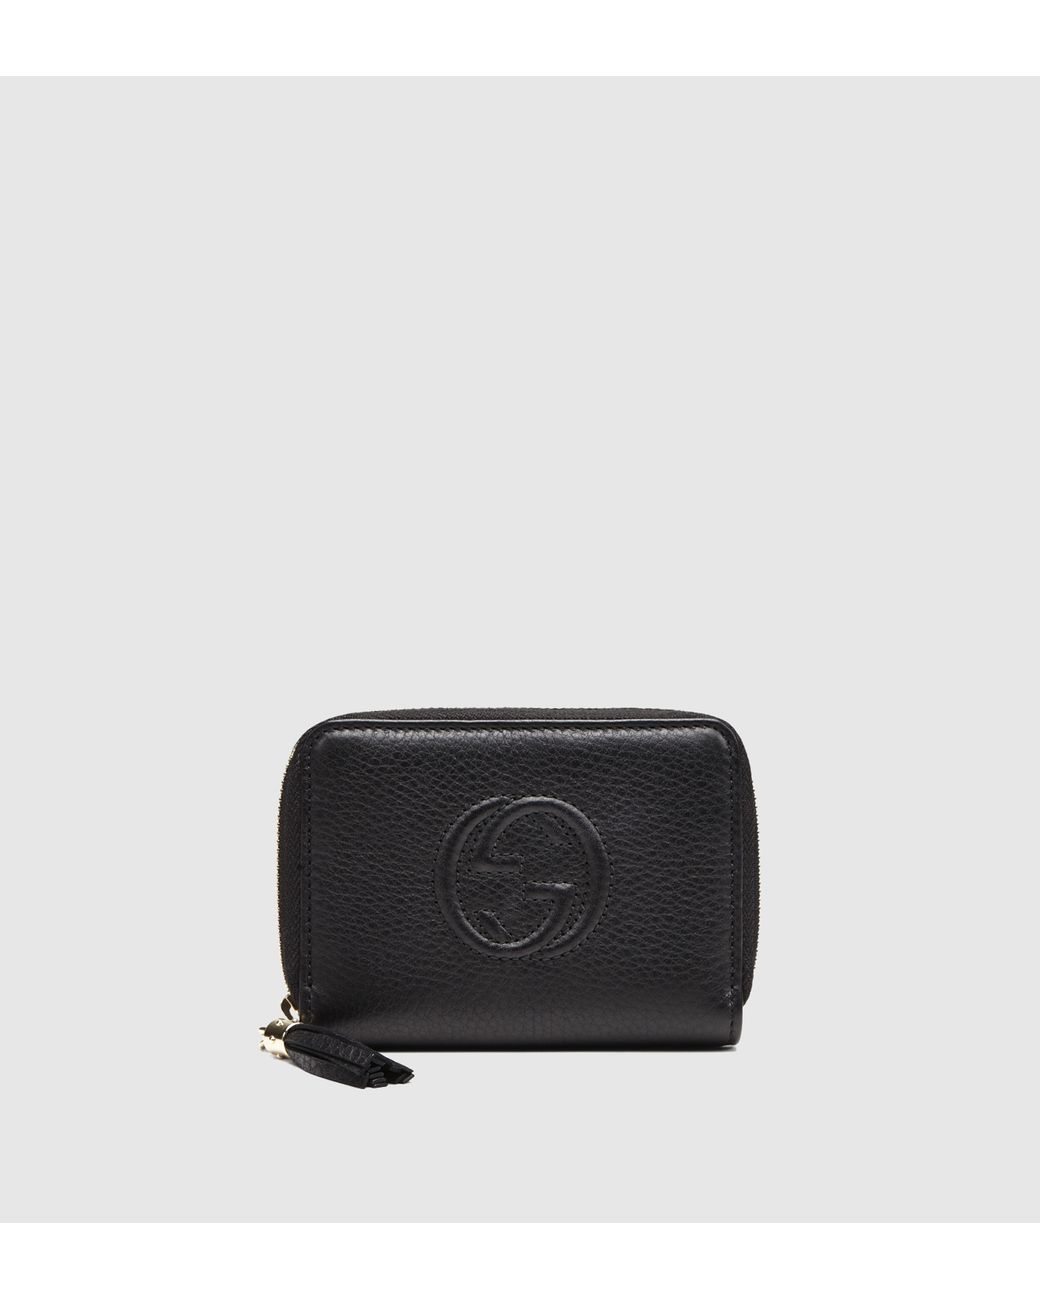 Gucci Soho Leather Zip-around Disco Wallet in Black | Lyst